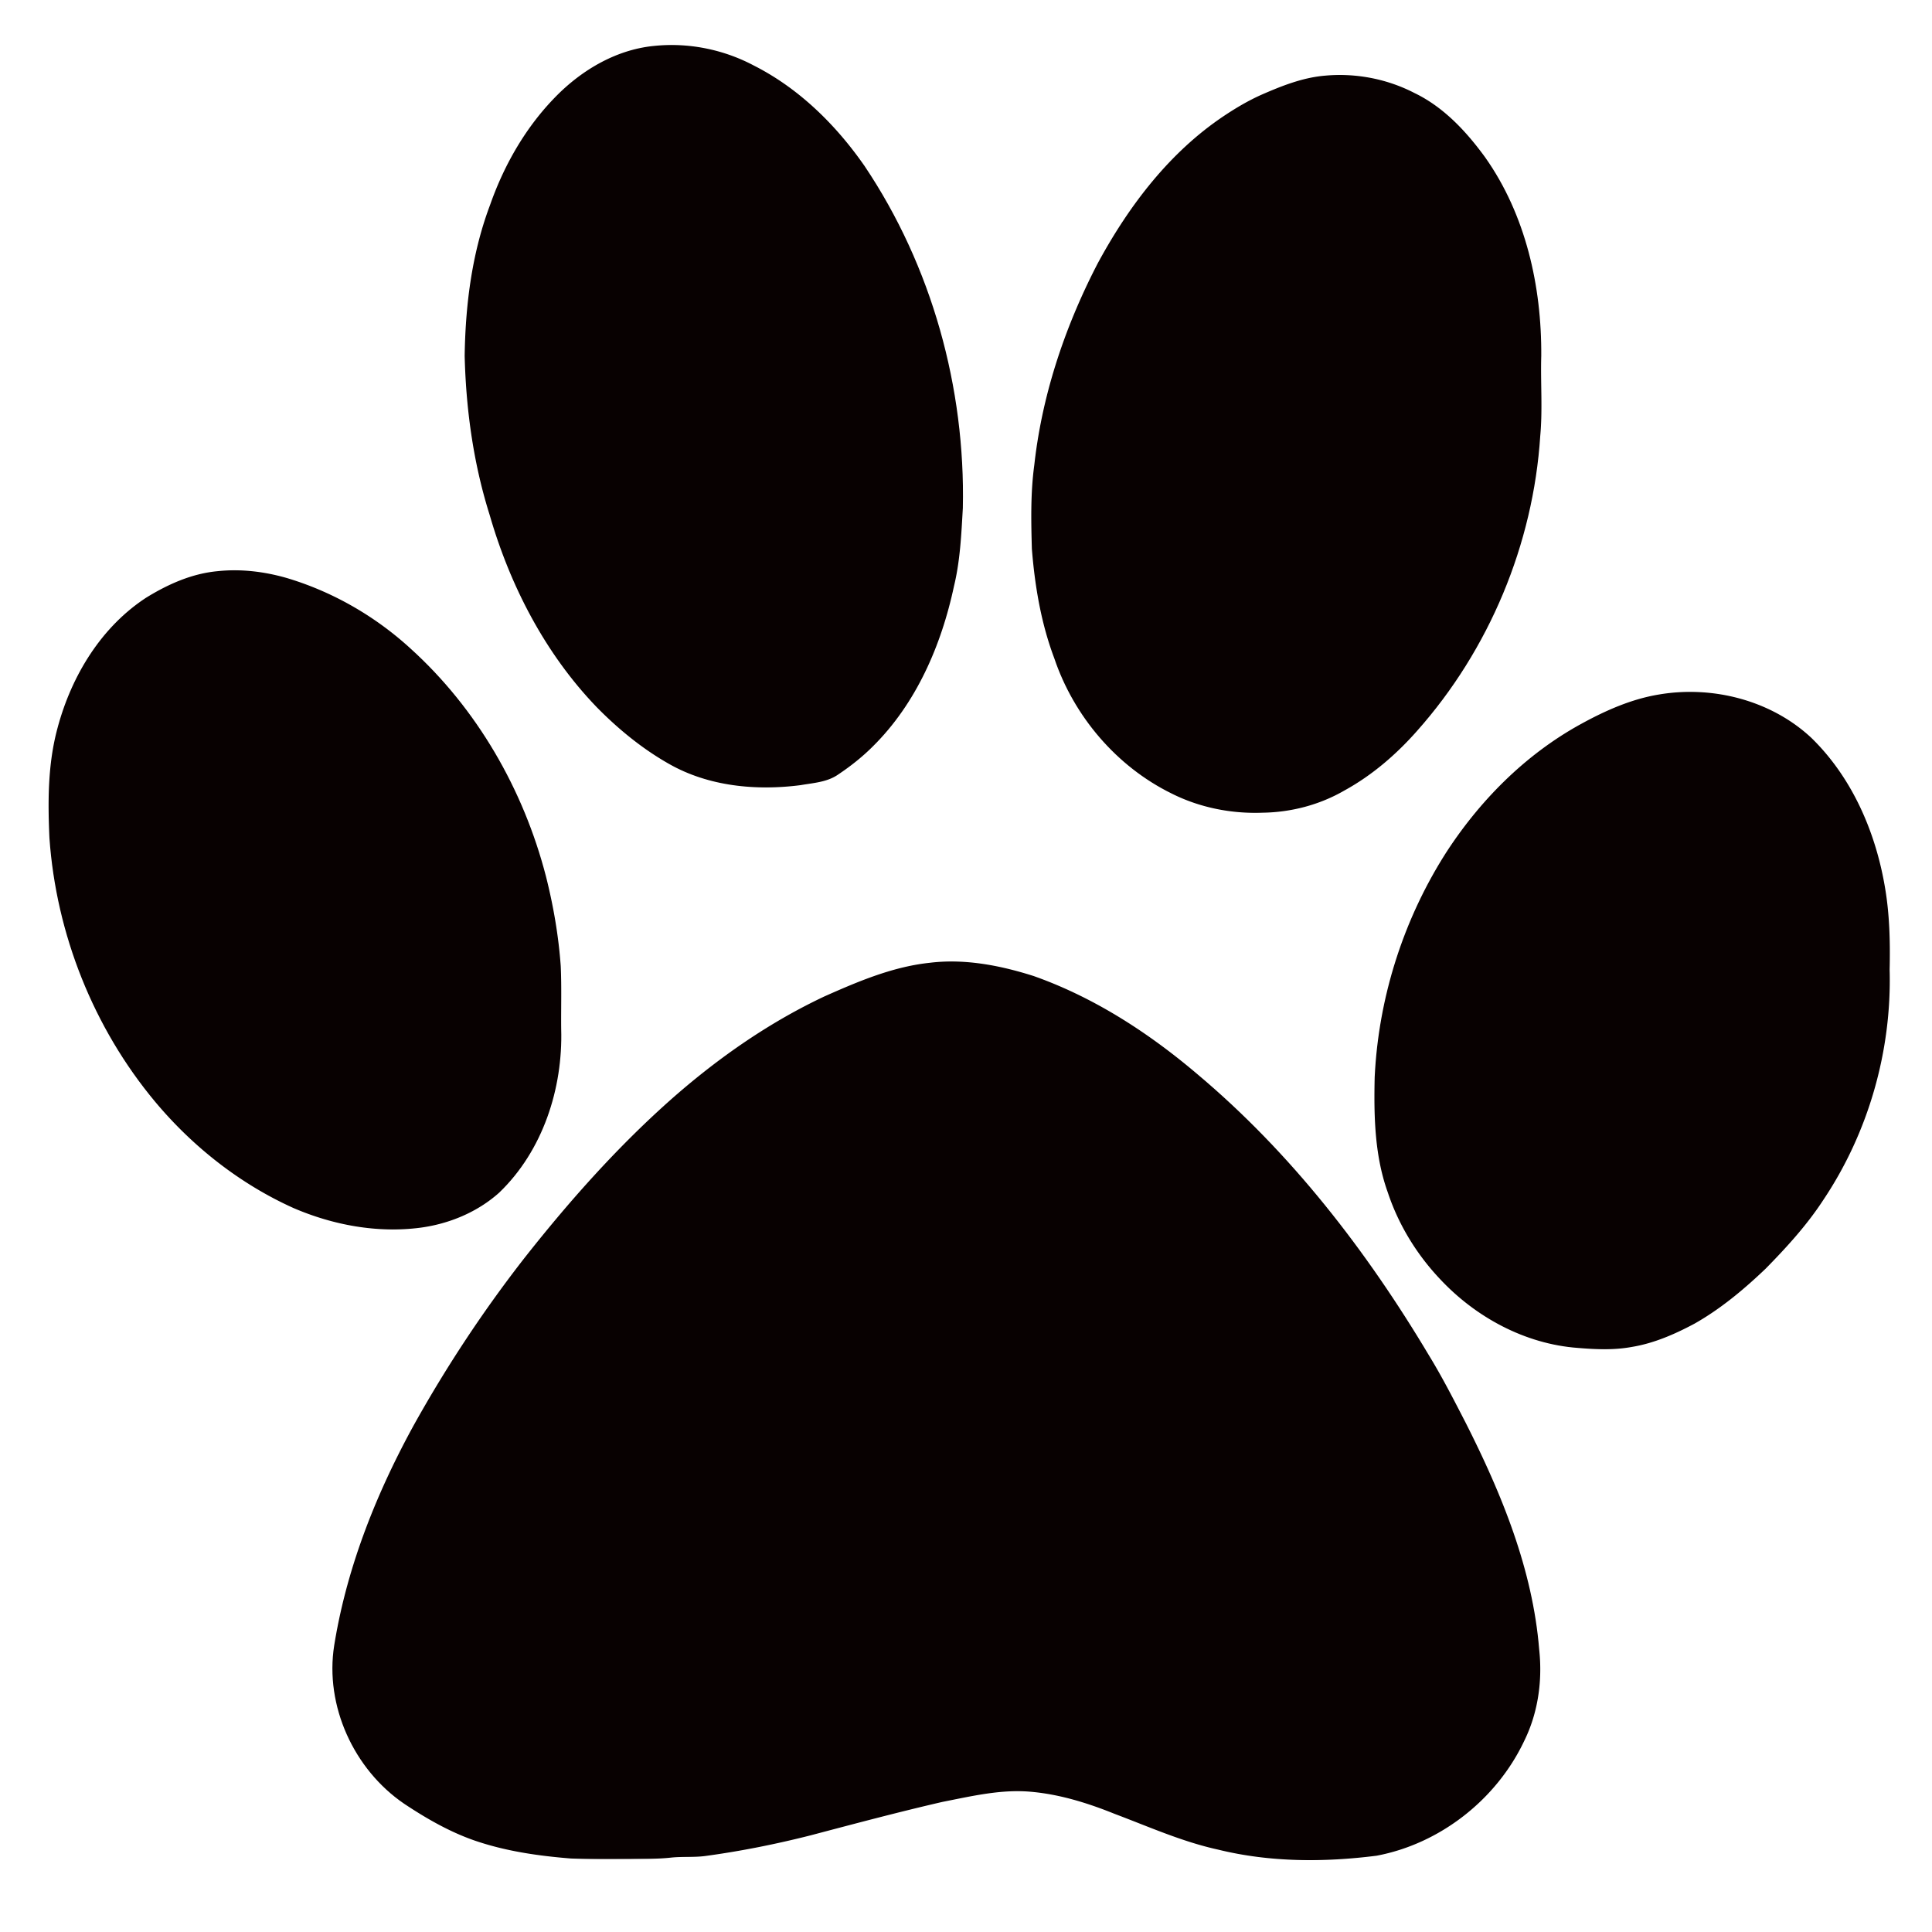 Dog Paw Print Images - HD Wallpapers Lovely